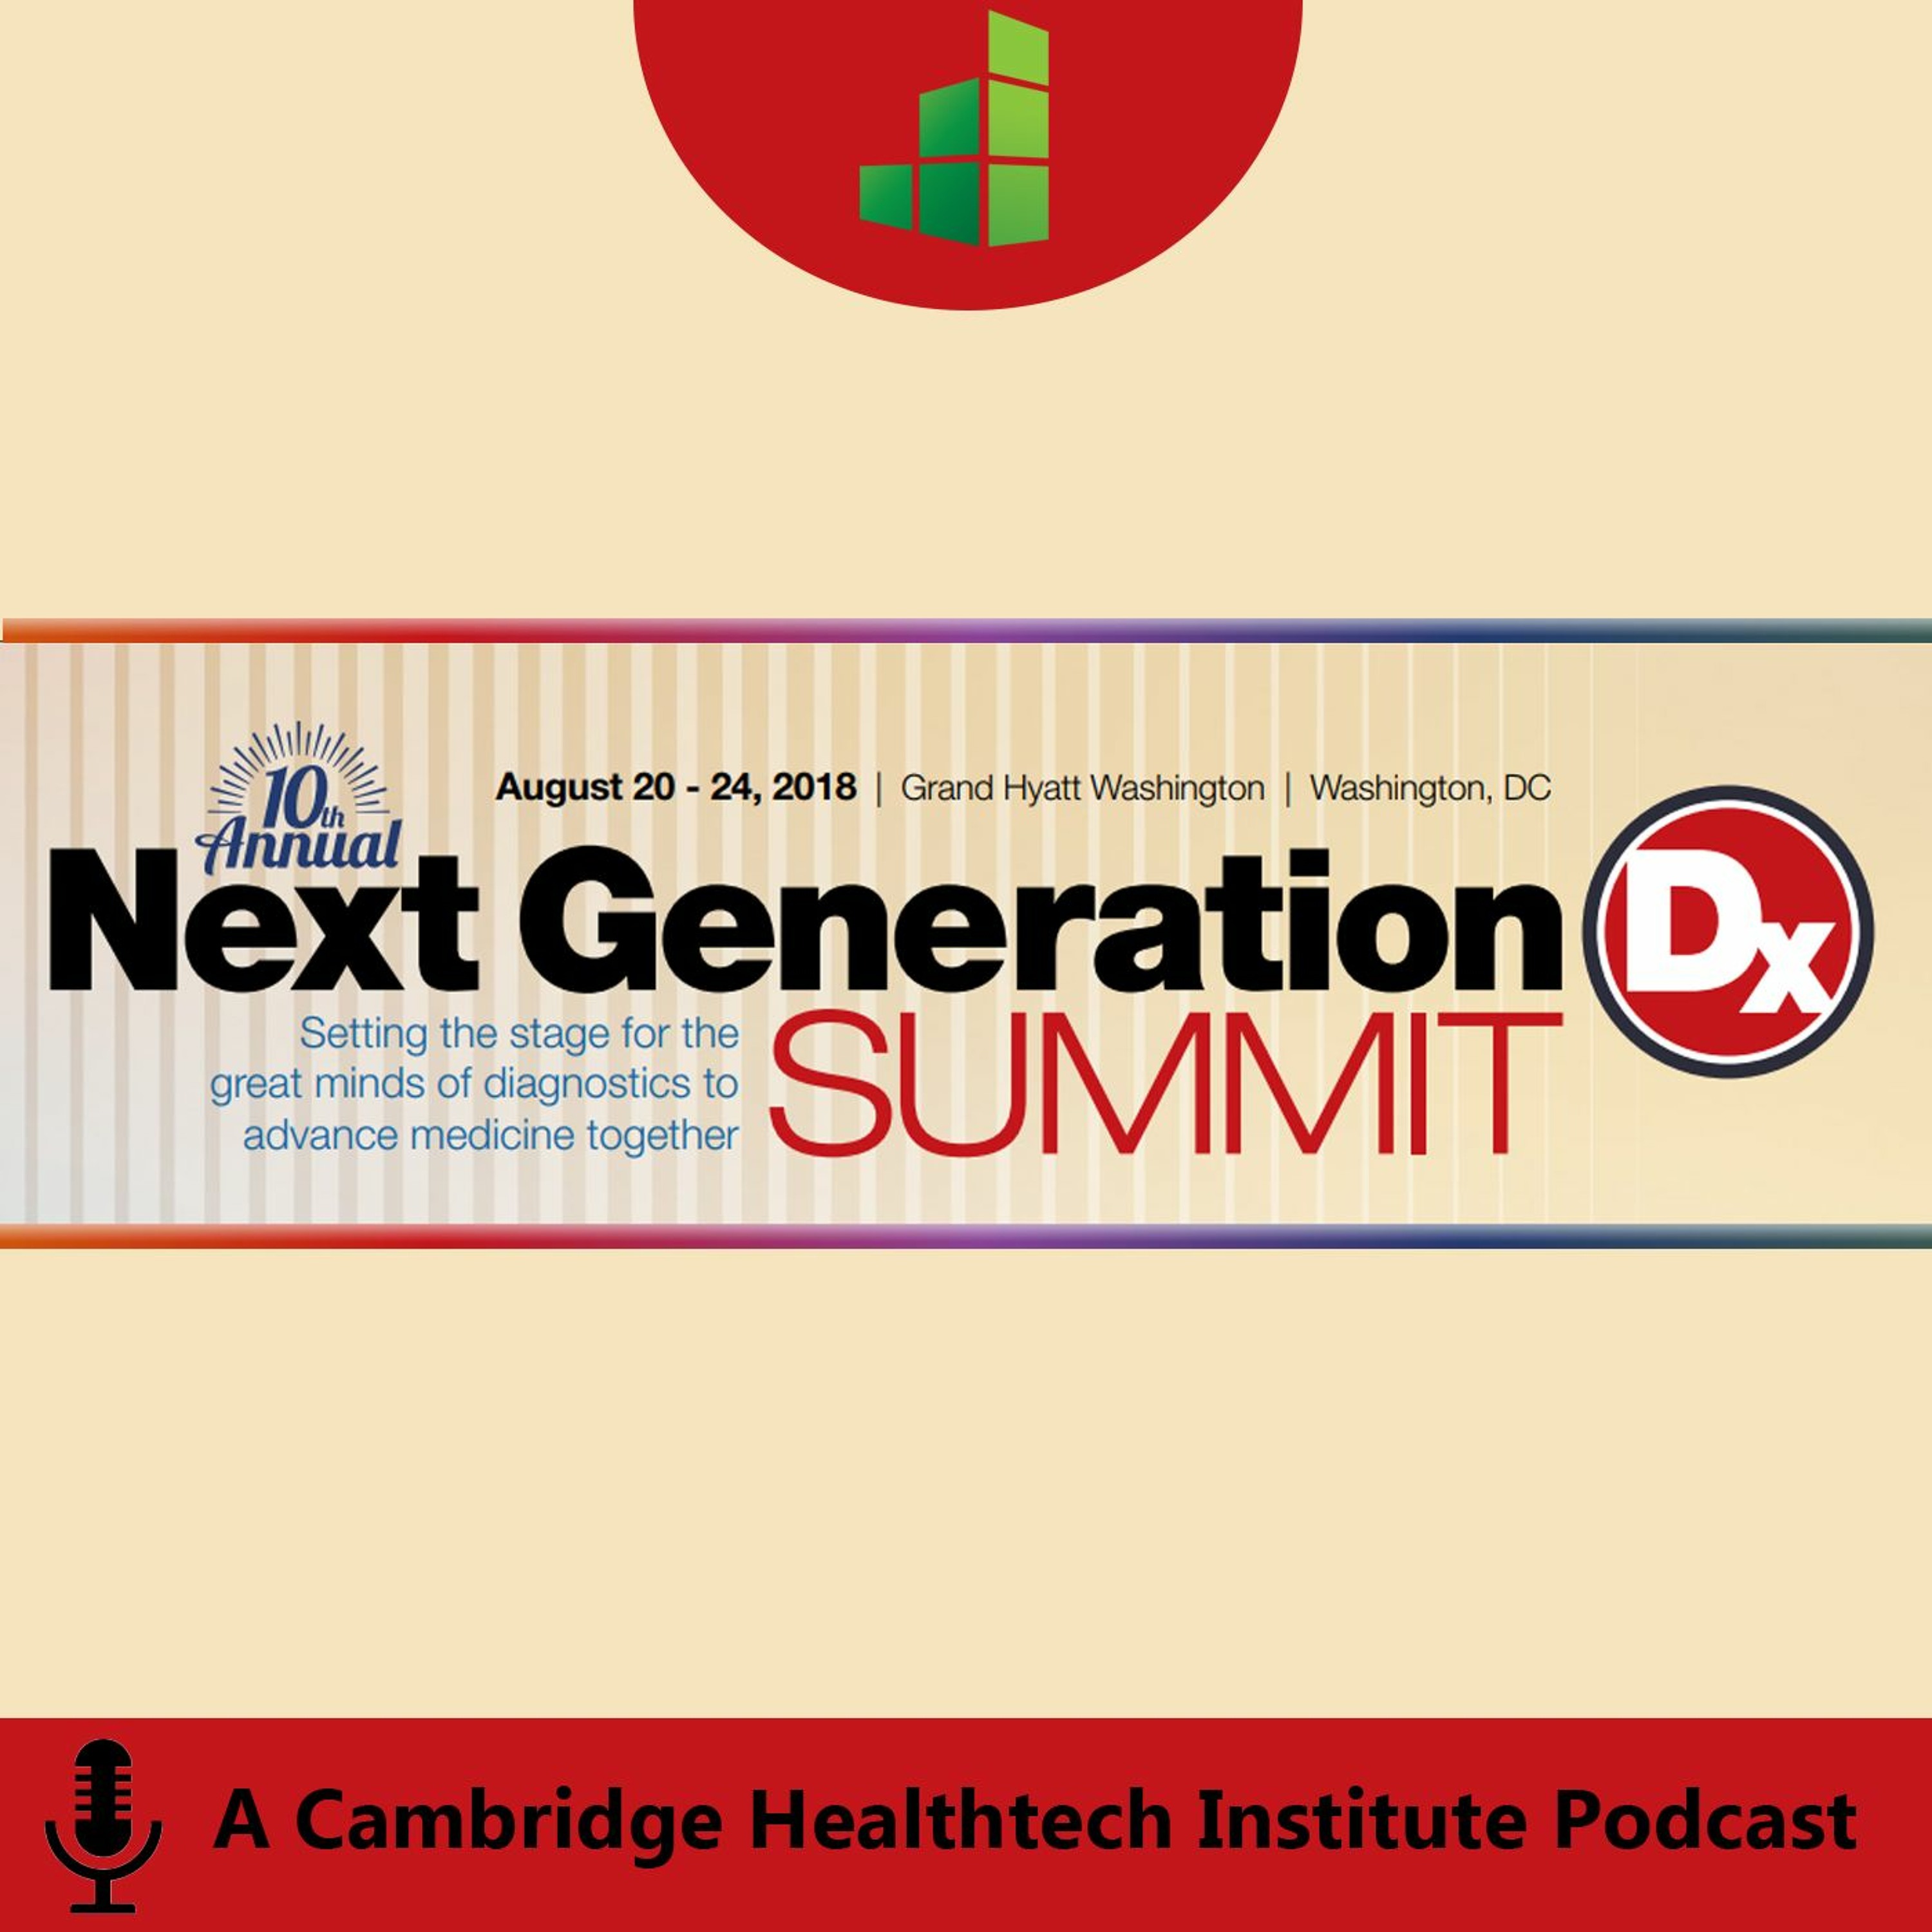 Next Generation DX Summit 2018 | Developing Low Cost Diagnostics for Infectious Disease